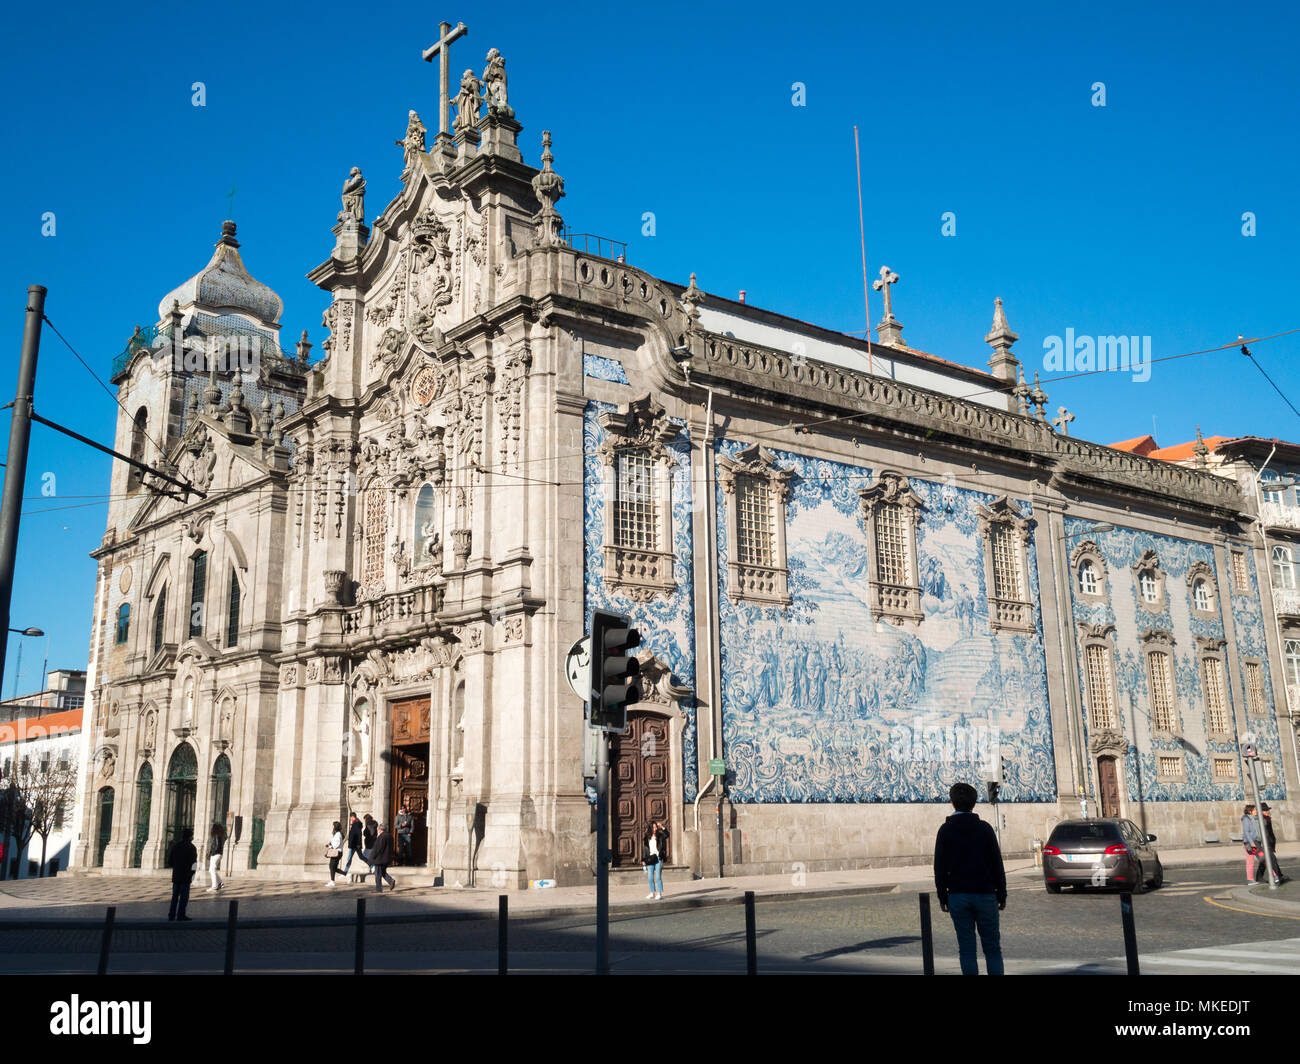 Oporto baroque churches covered in blue and white tiles Stock Photo